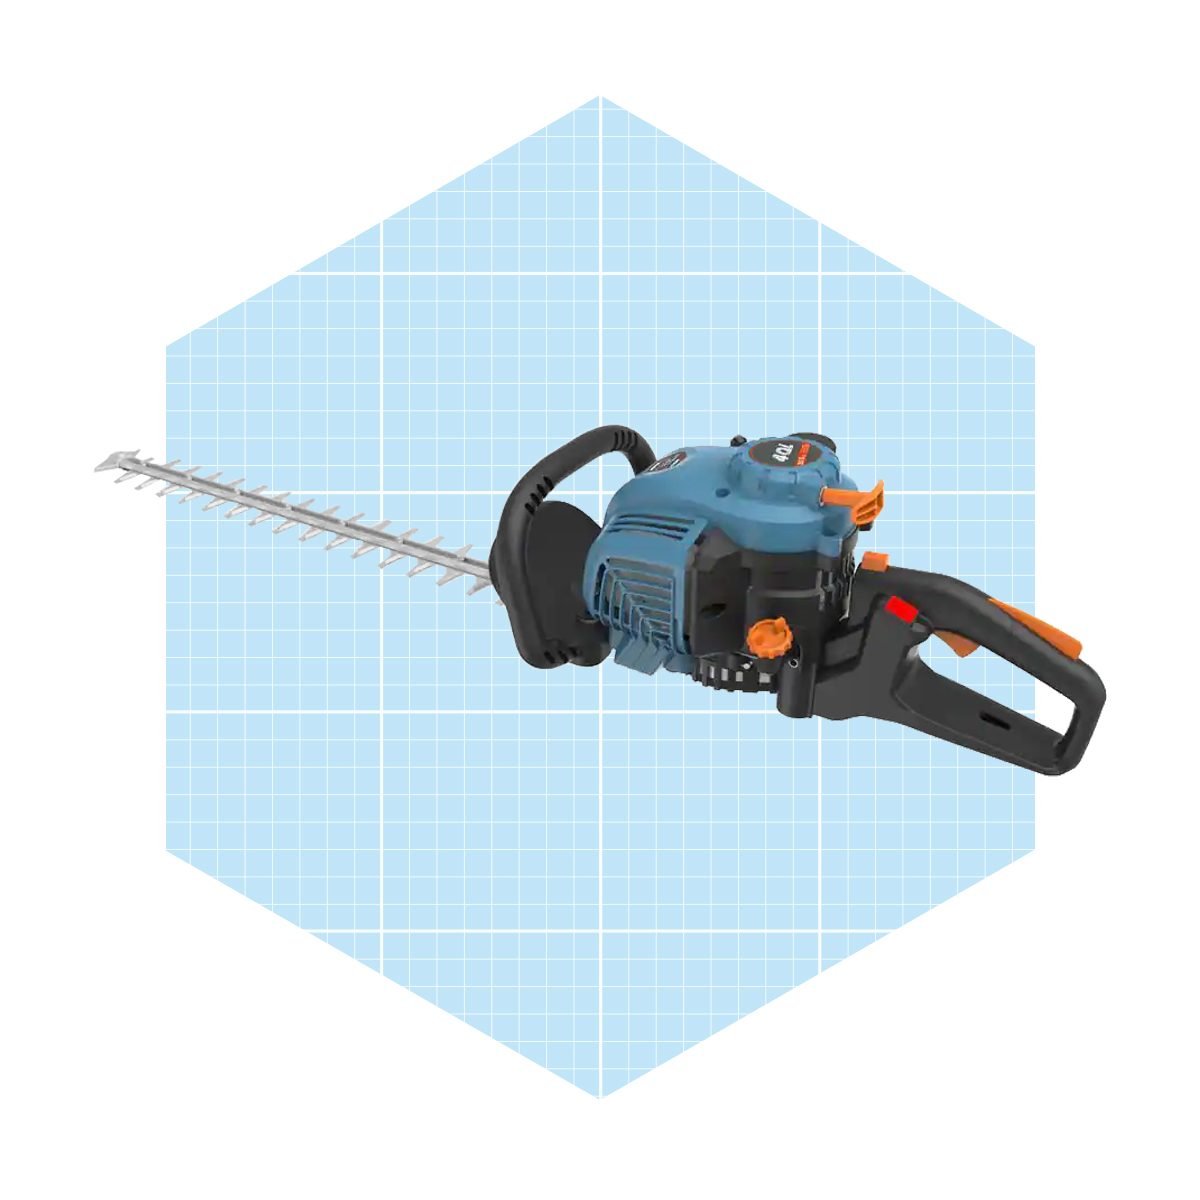 https://www.familyhandyman.com/wp-content/uploads/2021/08/Gas-4-Stroke-Hedge-Trimmer-with-a-22-in.-Bar-ecomm-homedepot.com_.jpg?fit=700%2C700